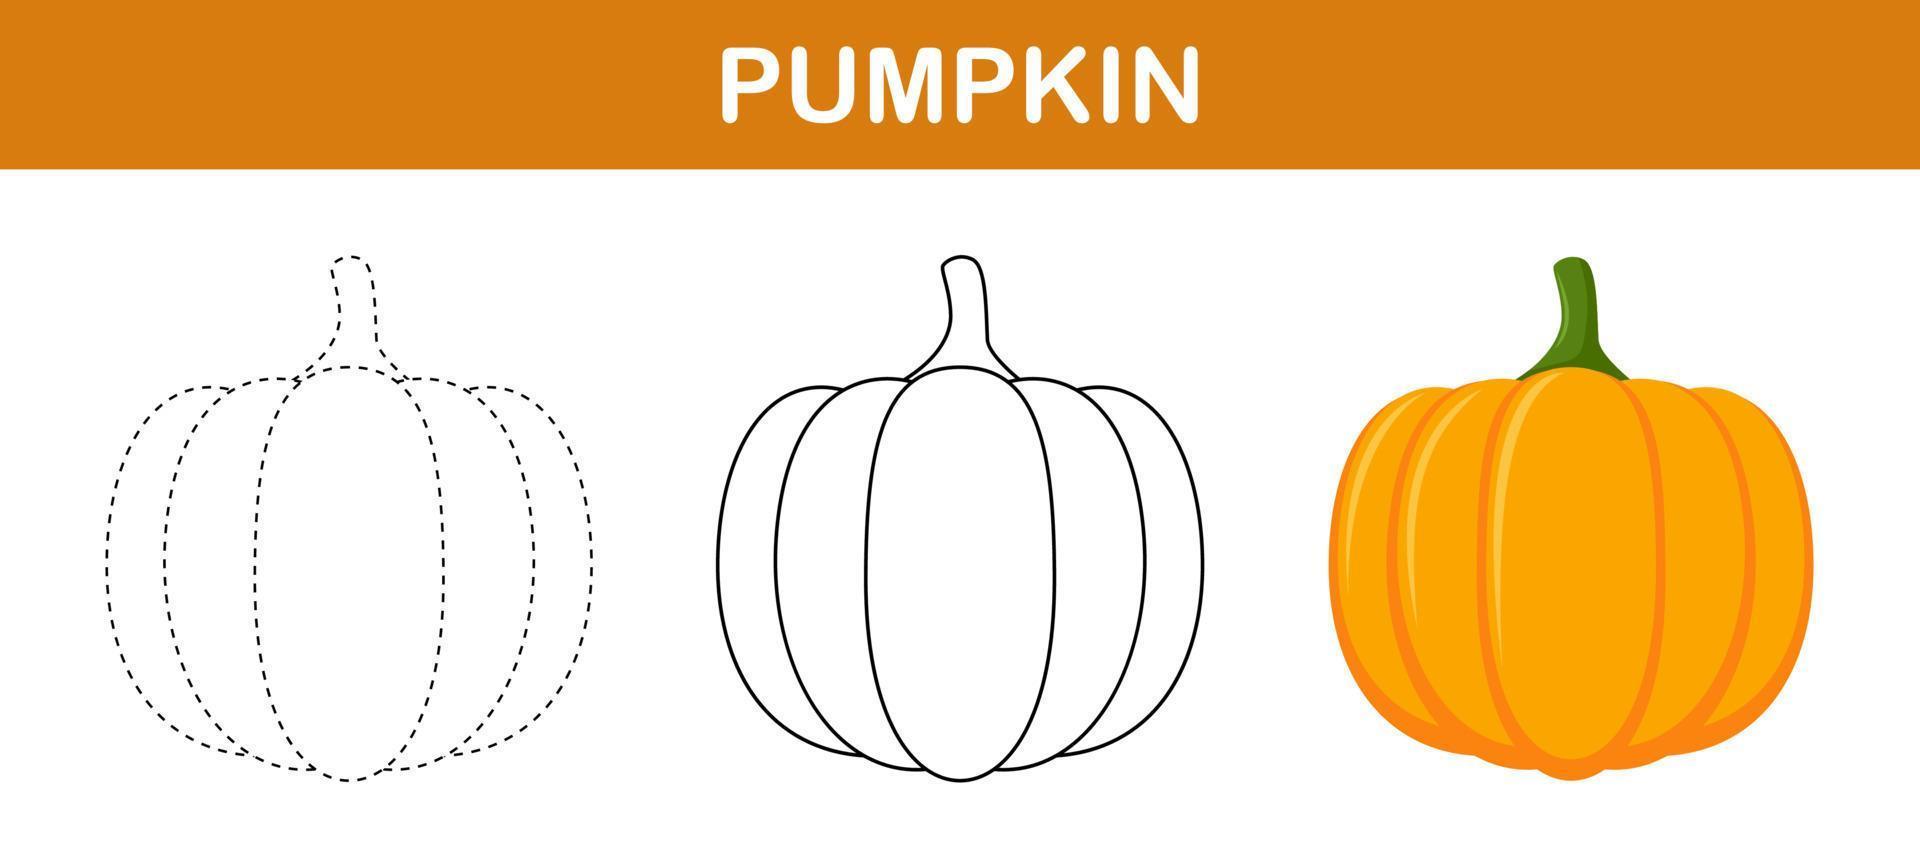 Pumpkin tracing and coloring worksheet for kids vector